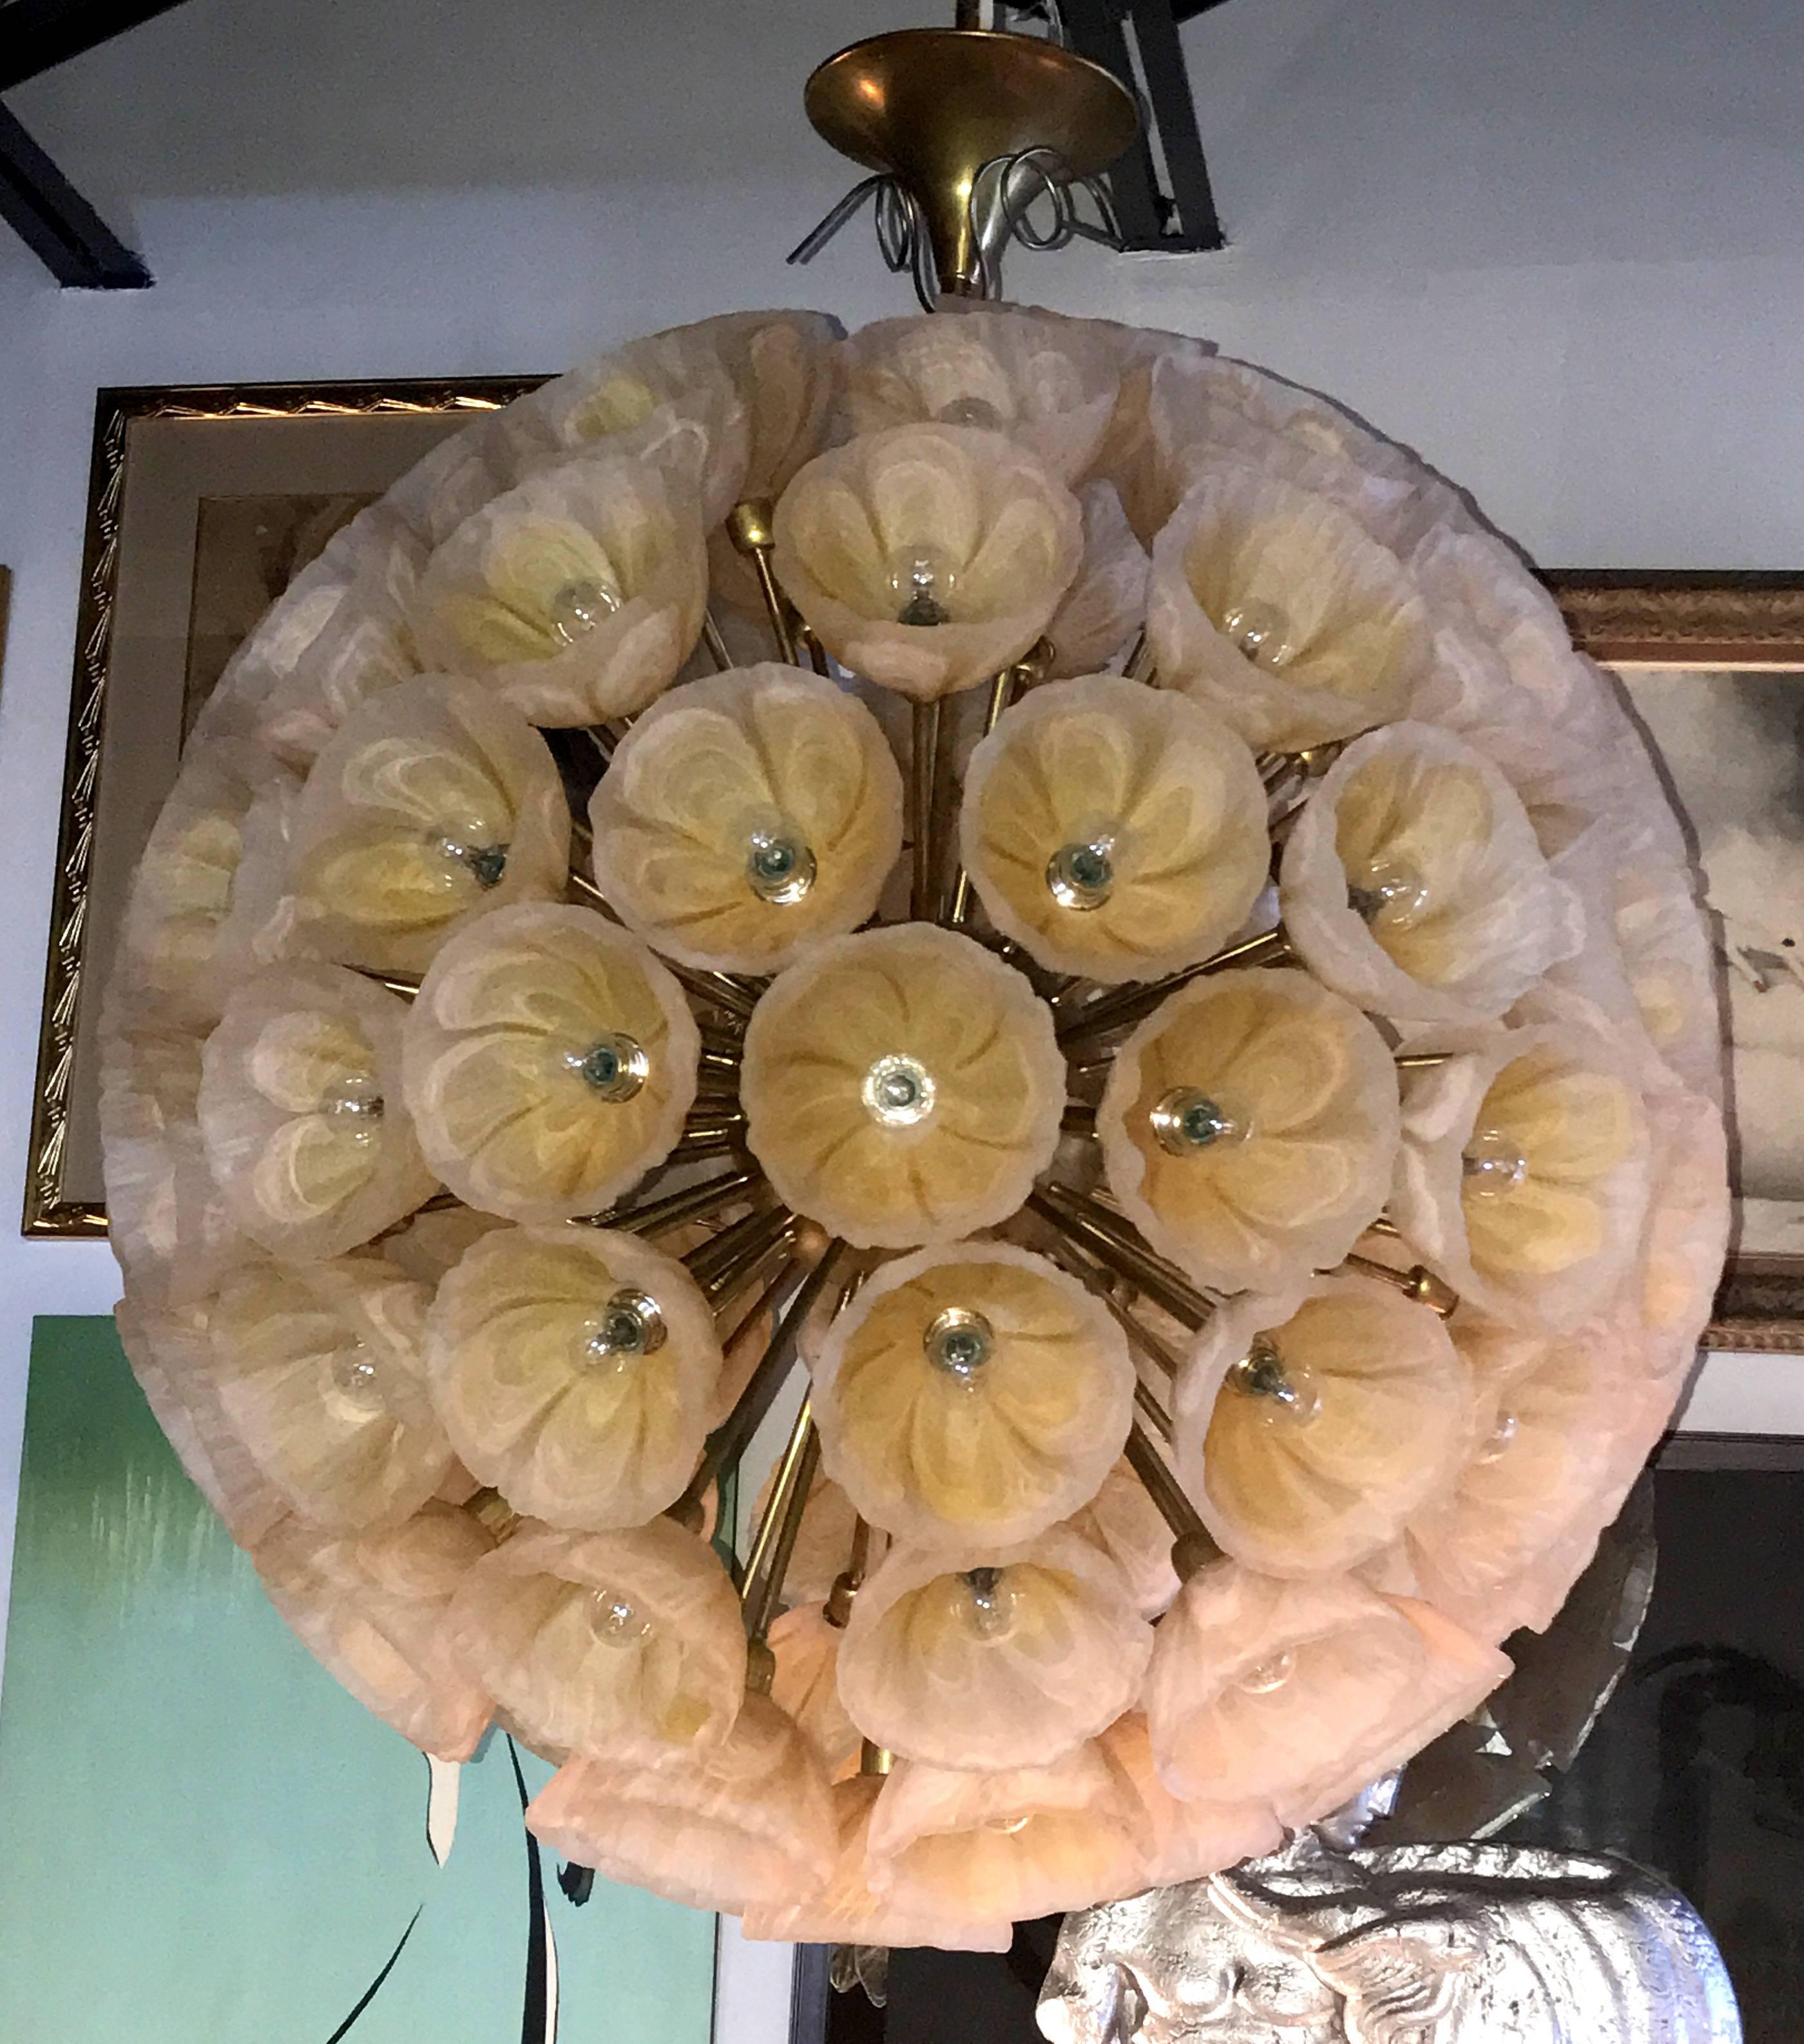 Large and spectacular chandelier of peach swirled Murano glass flowers on bronze stems and a bronze centre. The effect is sublime. The drop height can be shortened if necessary. The chandelier has European wiring.